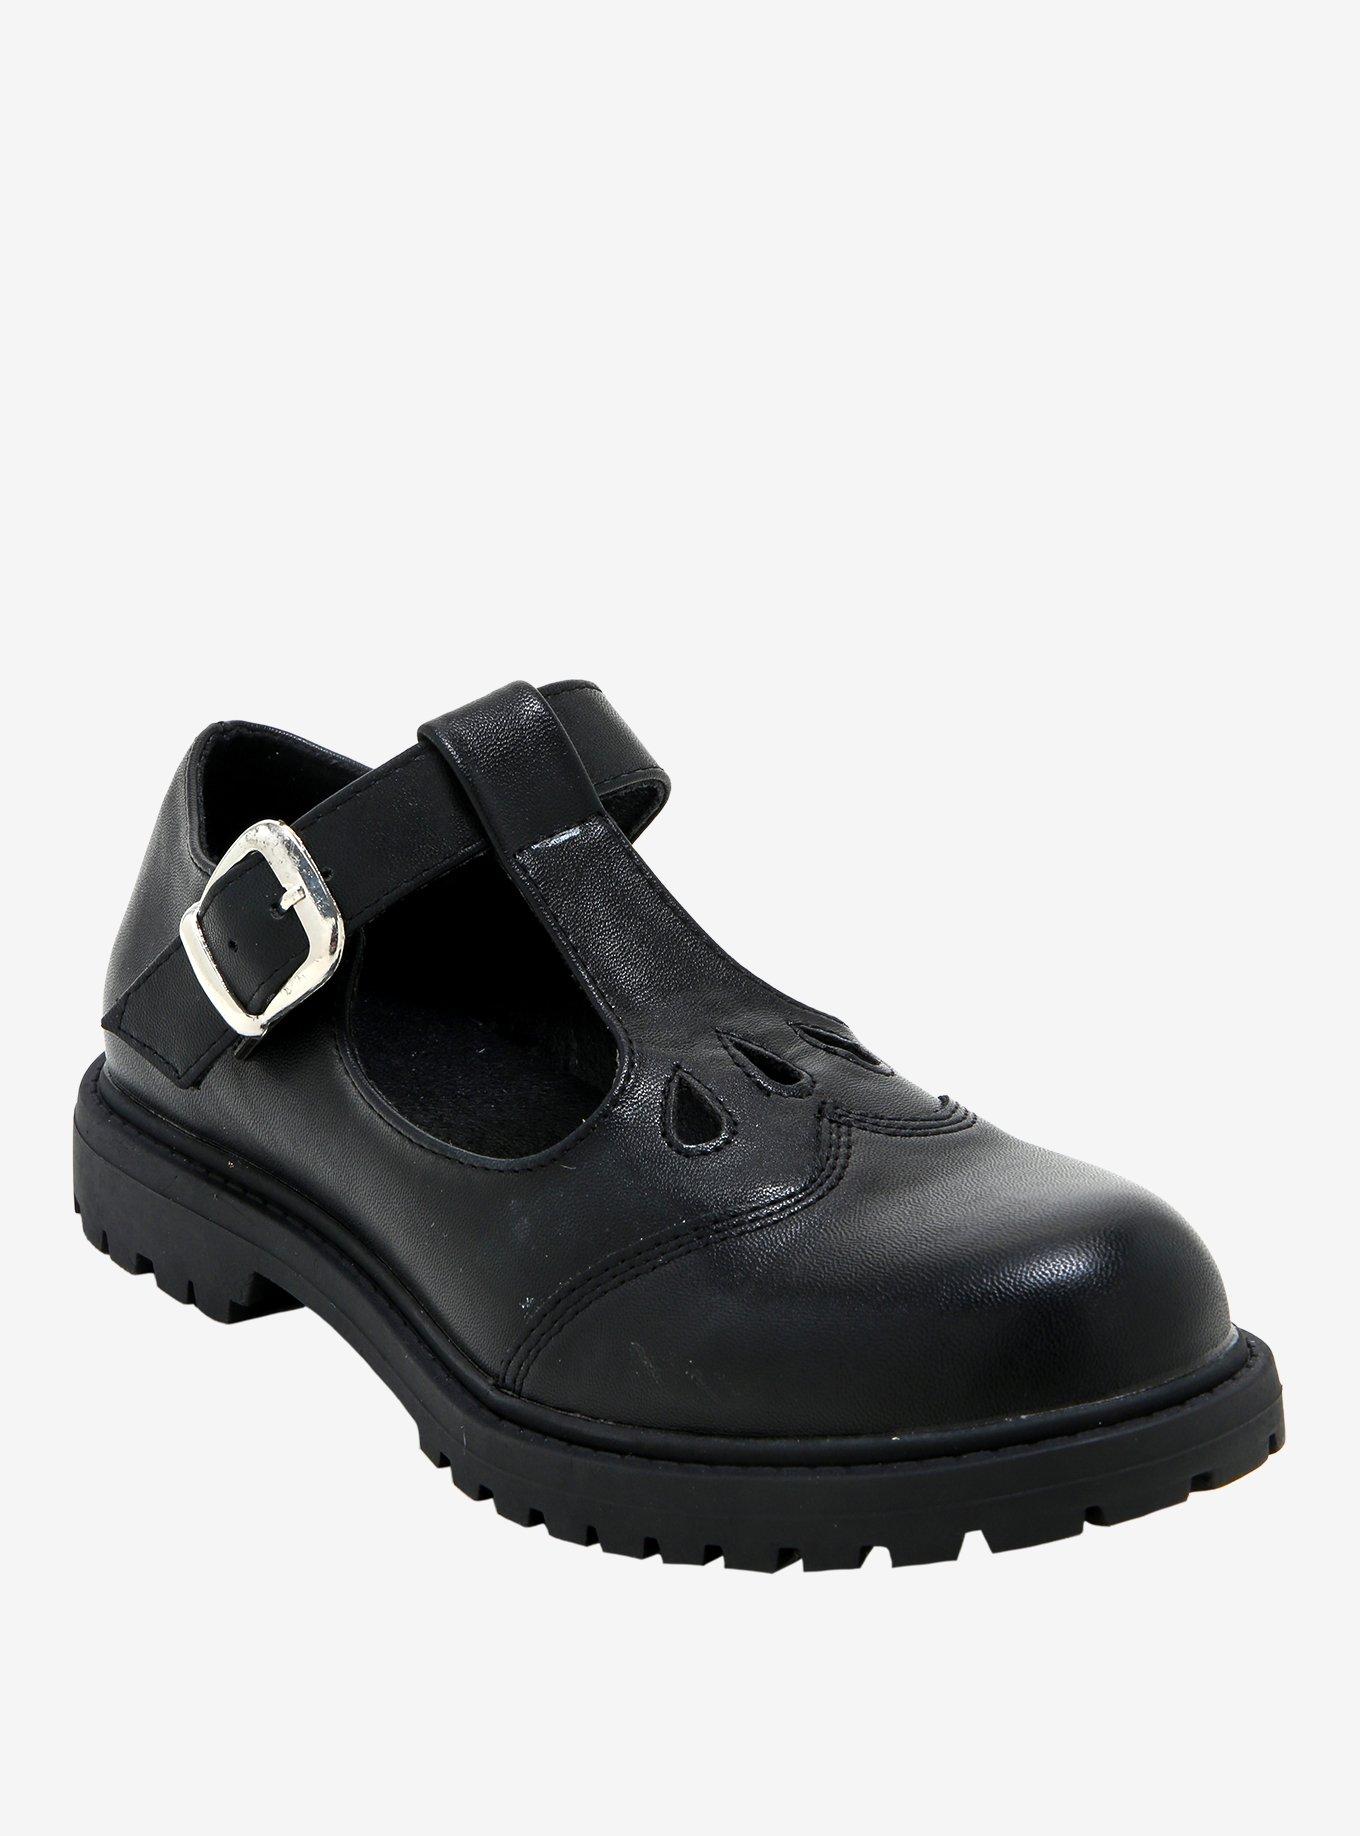 Faux Leather Strap Mary Janes, BLACK, hi-res